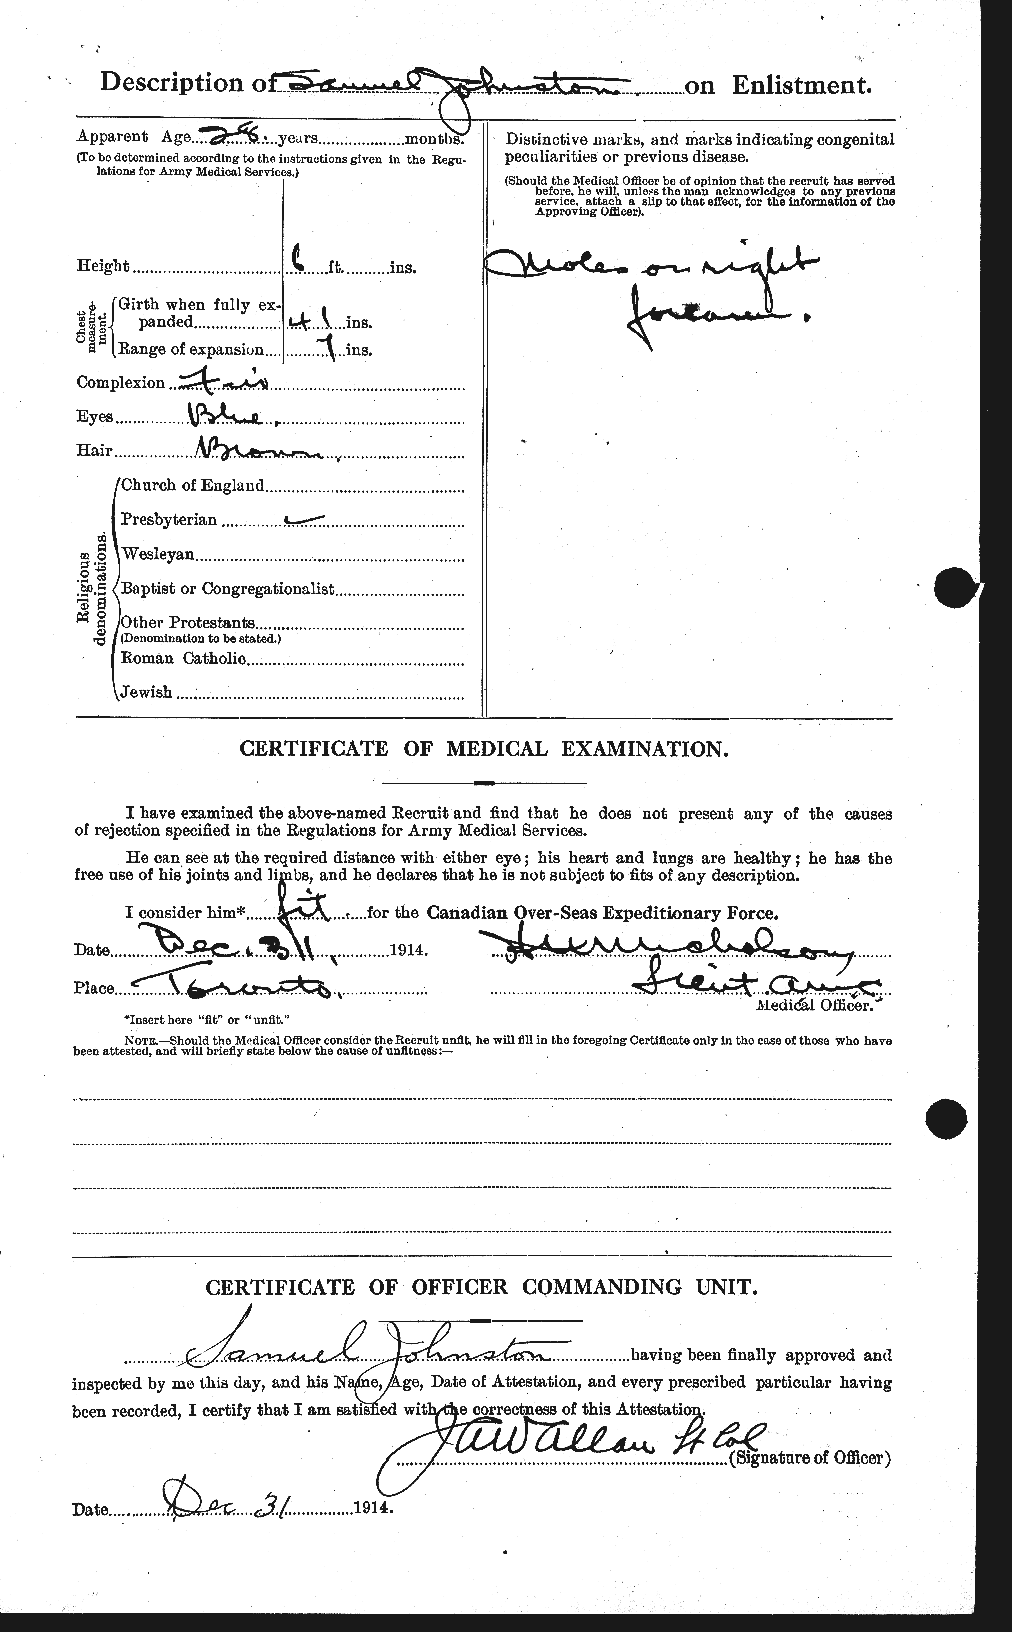 Personnel Records of the First World War - CEF 427082b